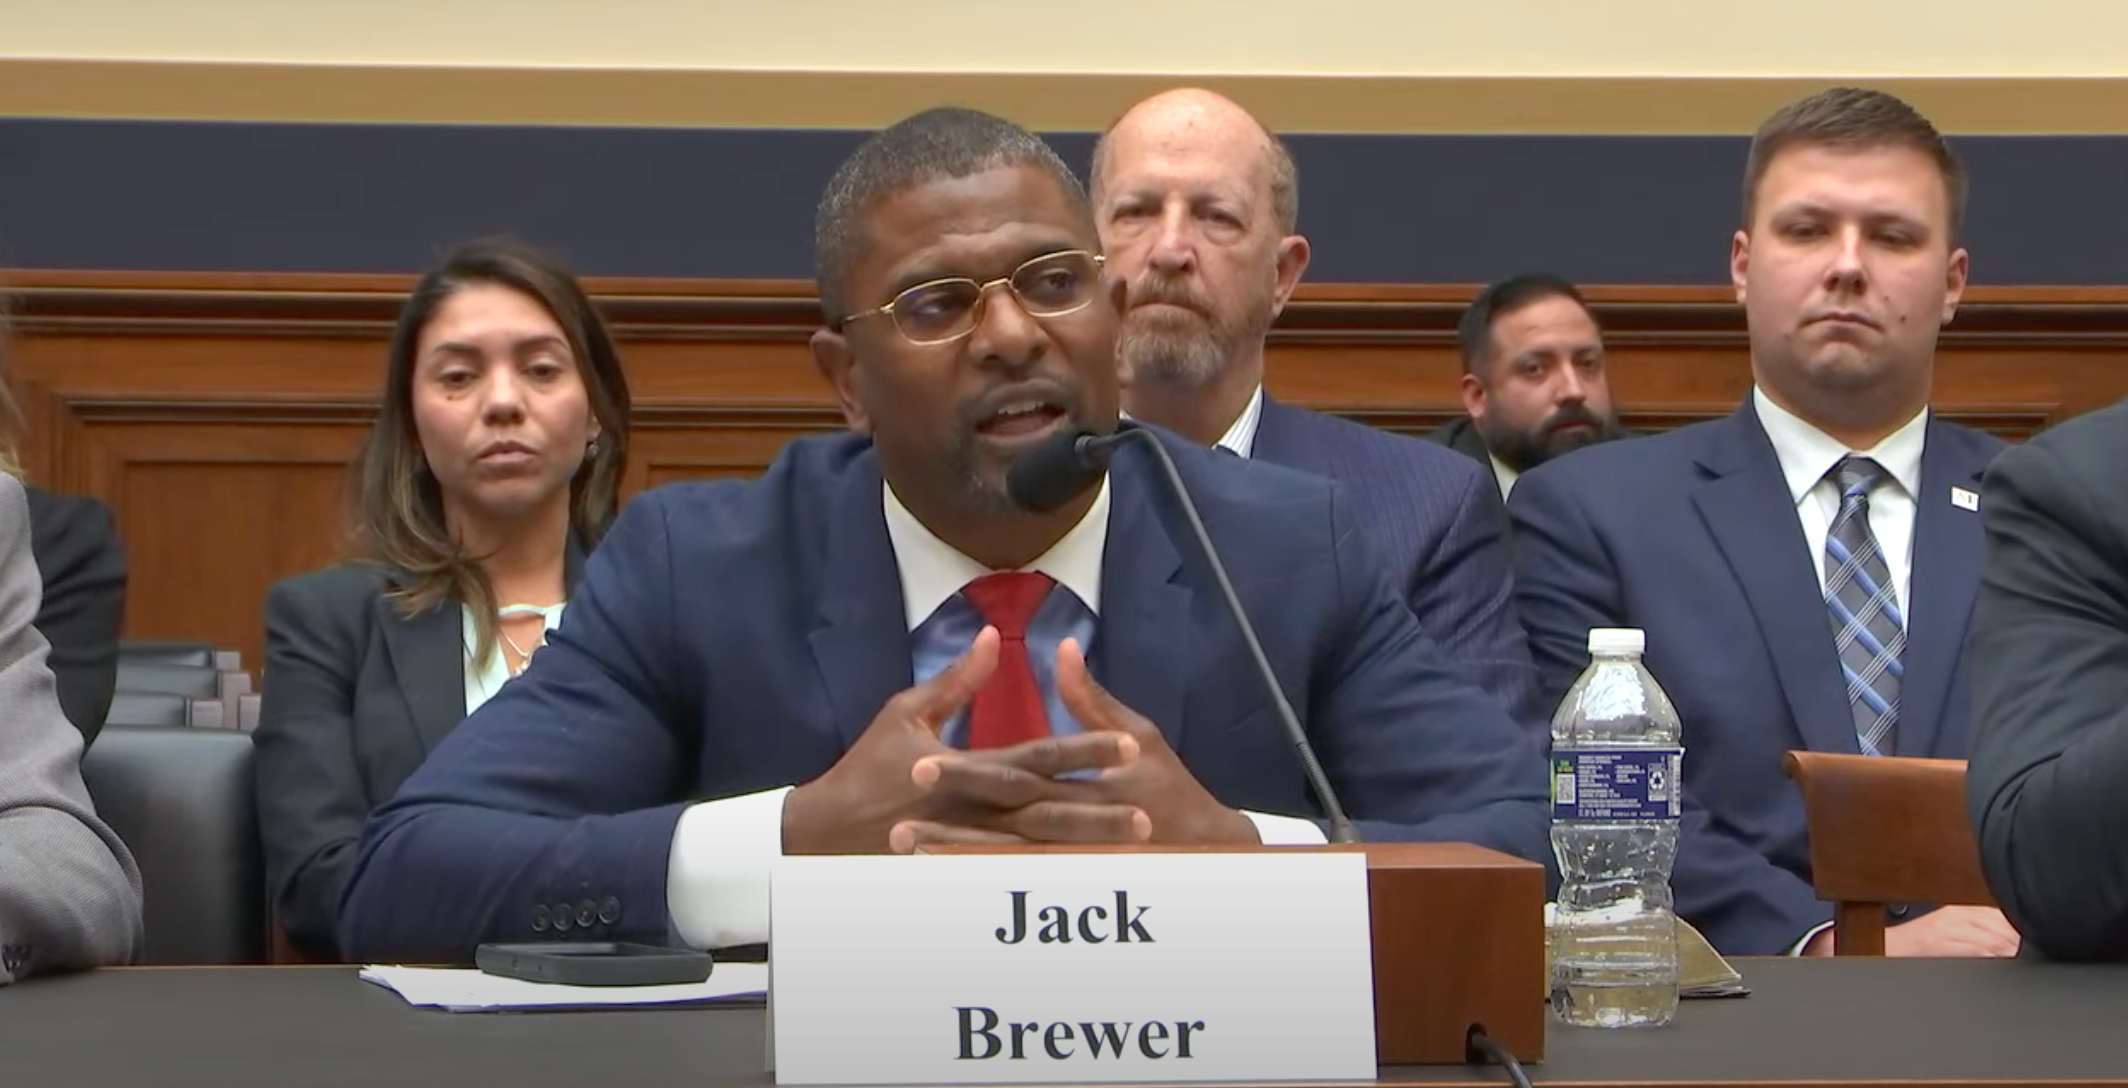 Jack Brewer testifies to the House Committee on the Judiciary on 15 December